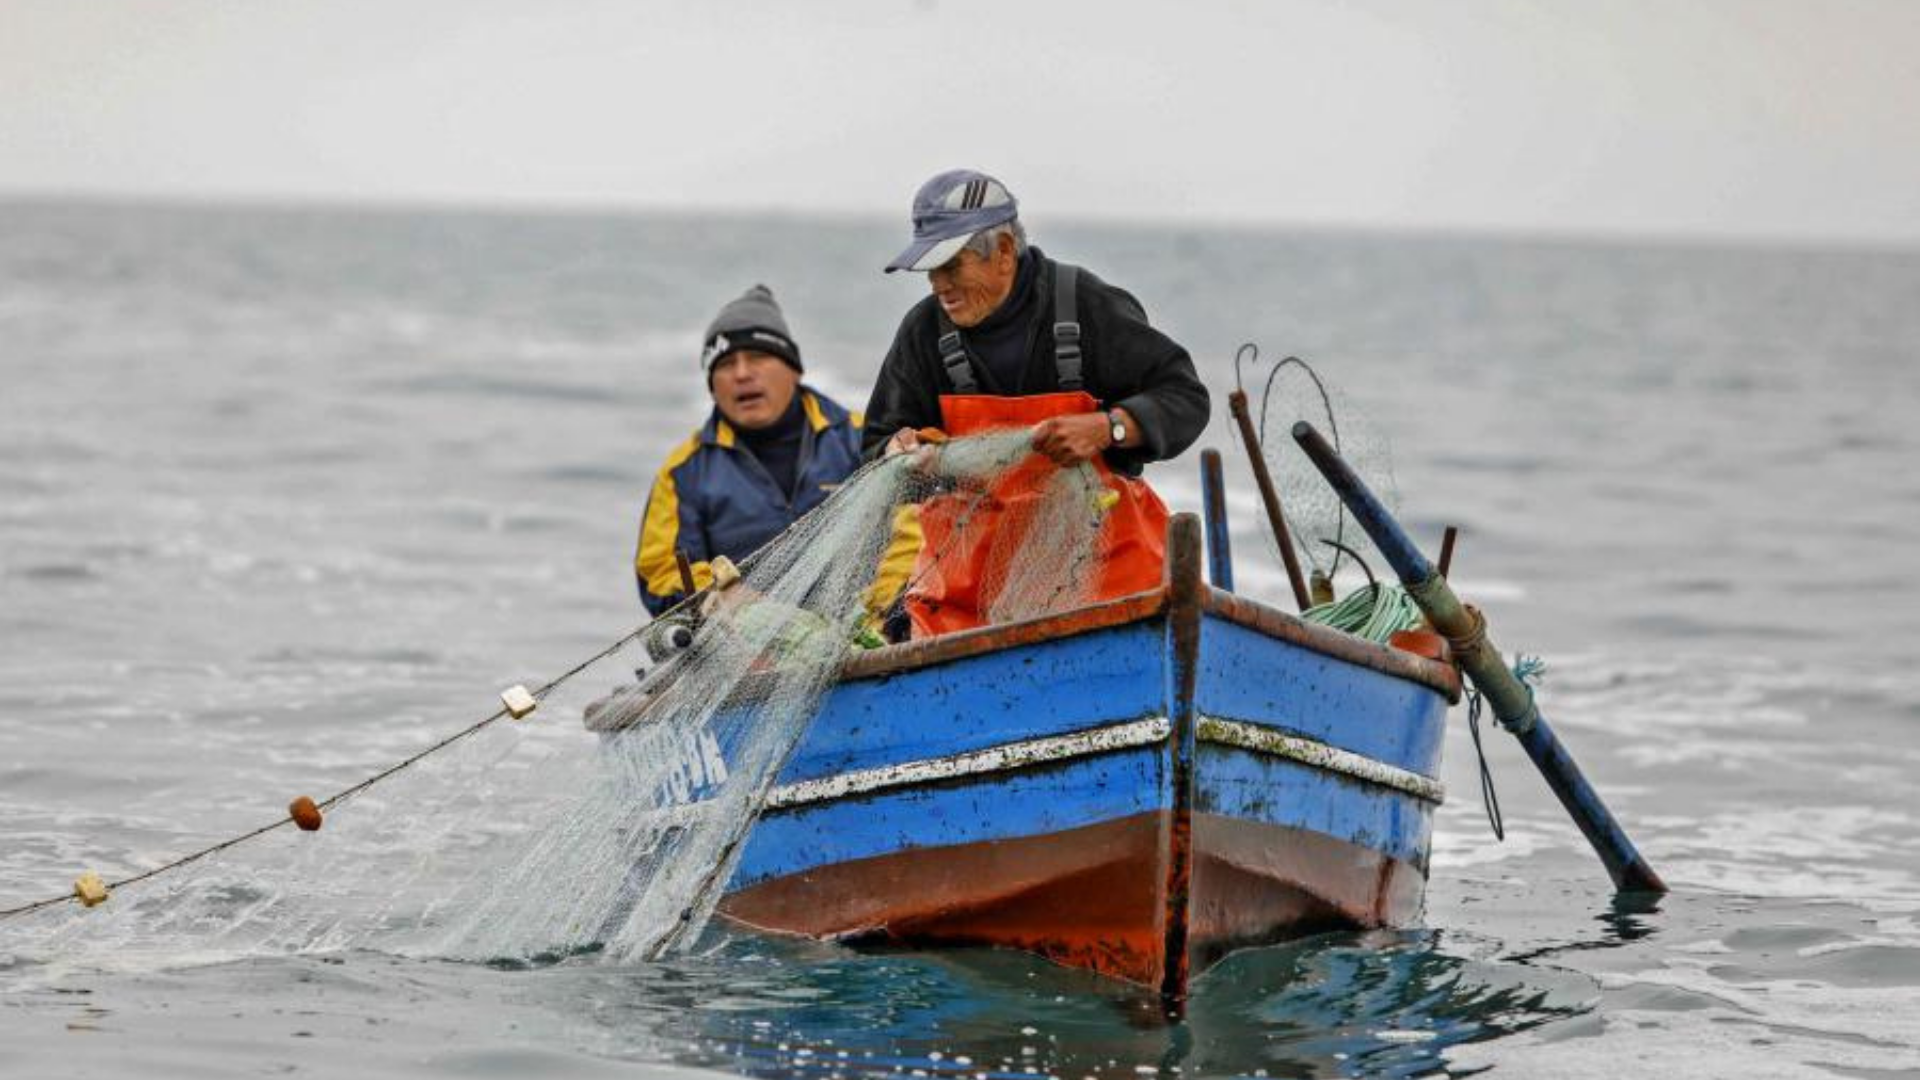 Bonus of S/500 to artisanal fishermen would be approved this Wednesday, February 8